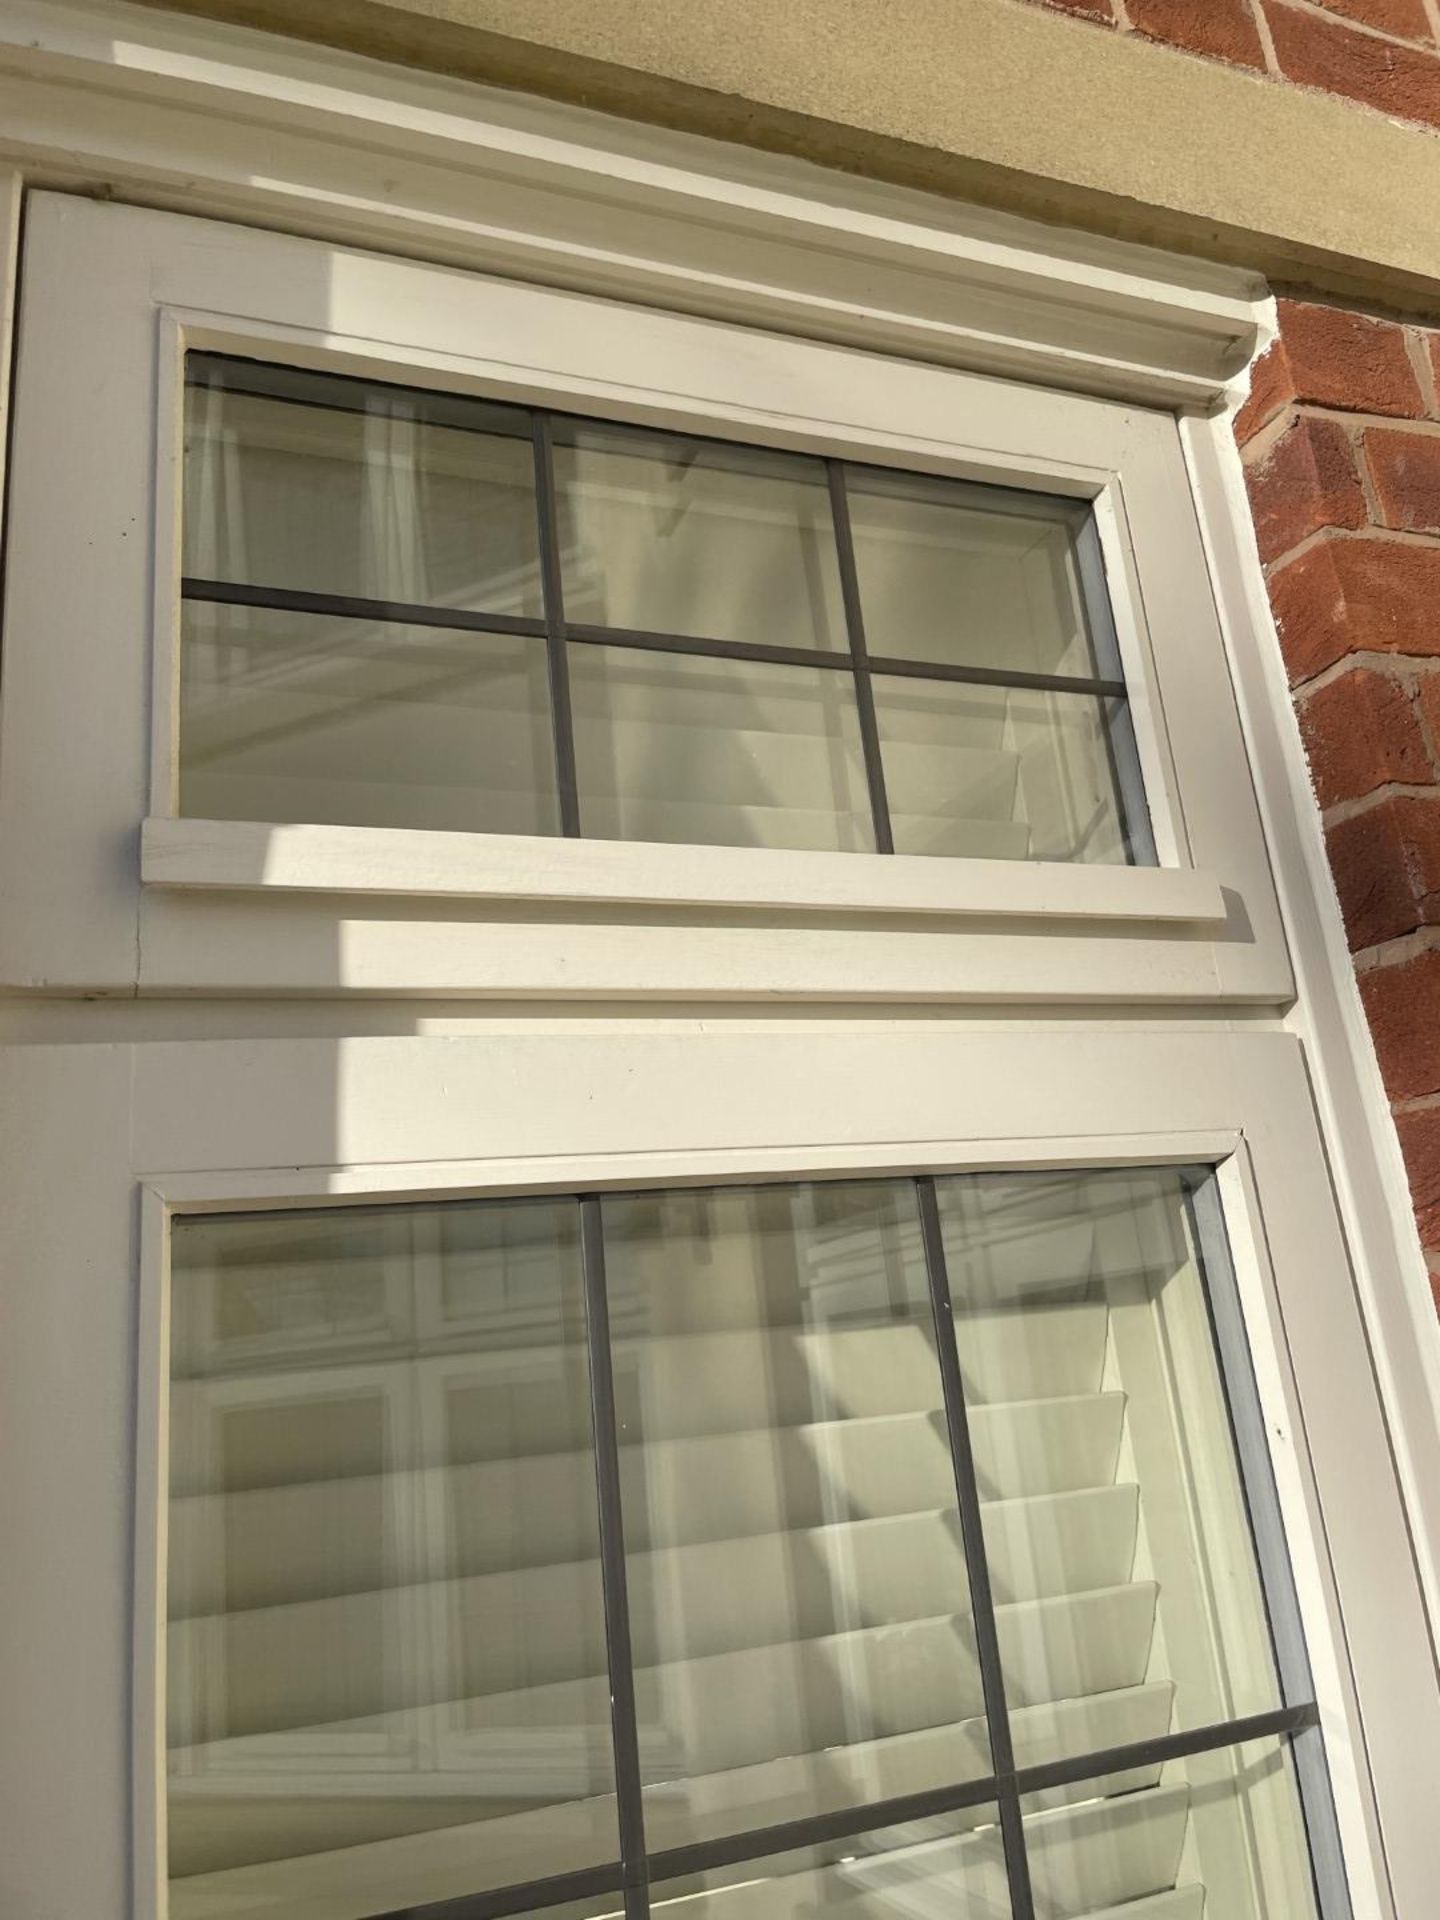 1 x Hardwood Timber Double Glazed Window Frames fitted with Shutter Blinds, In White - Ref: PAN106 - Image 20 of 23